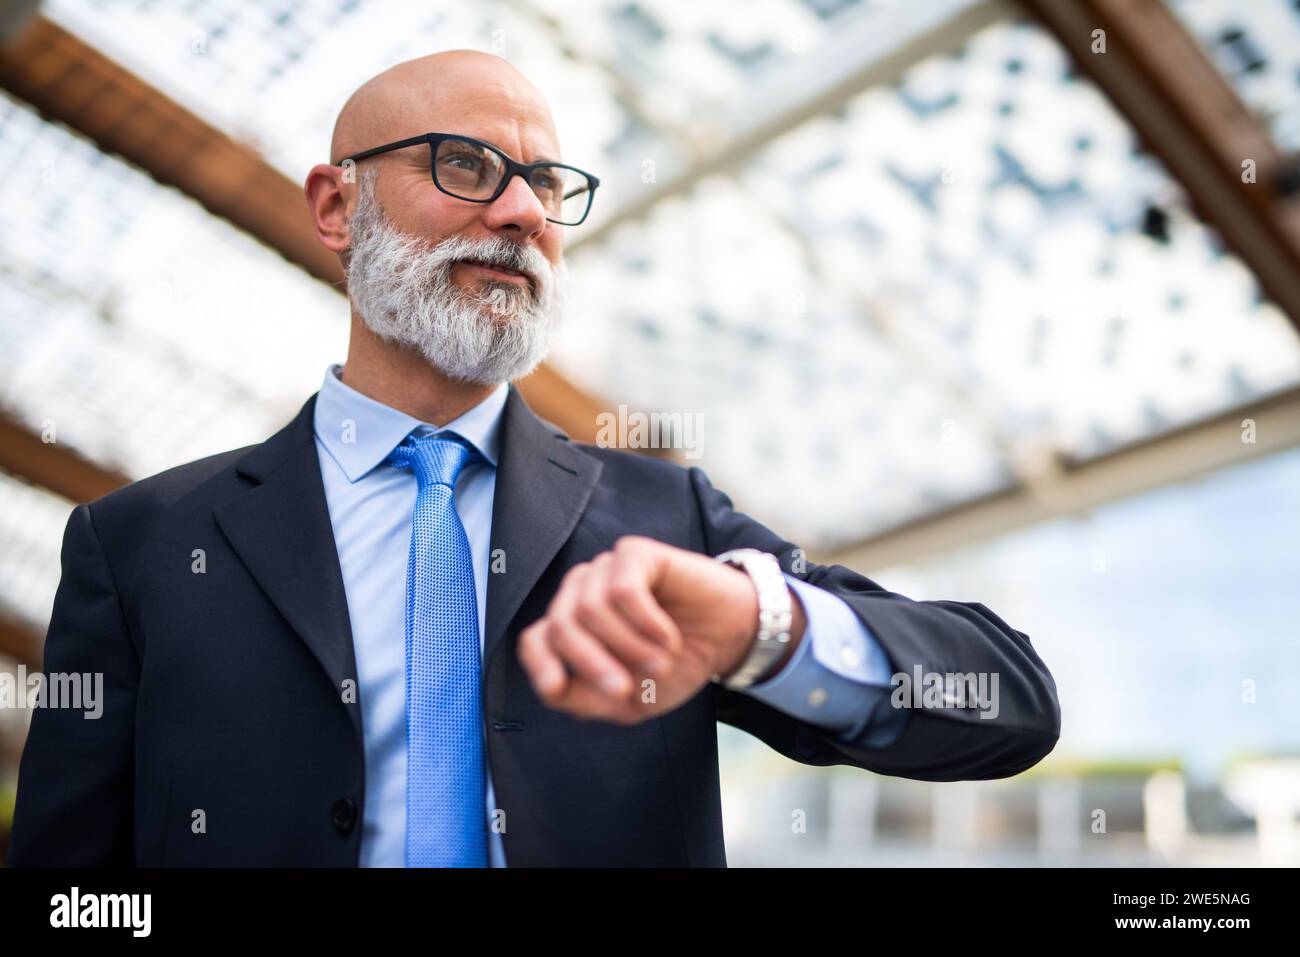 Smiling businessman checking his wrist watch while waiting for someone Stock Photo